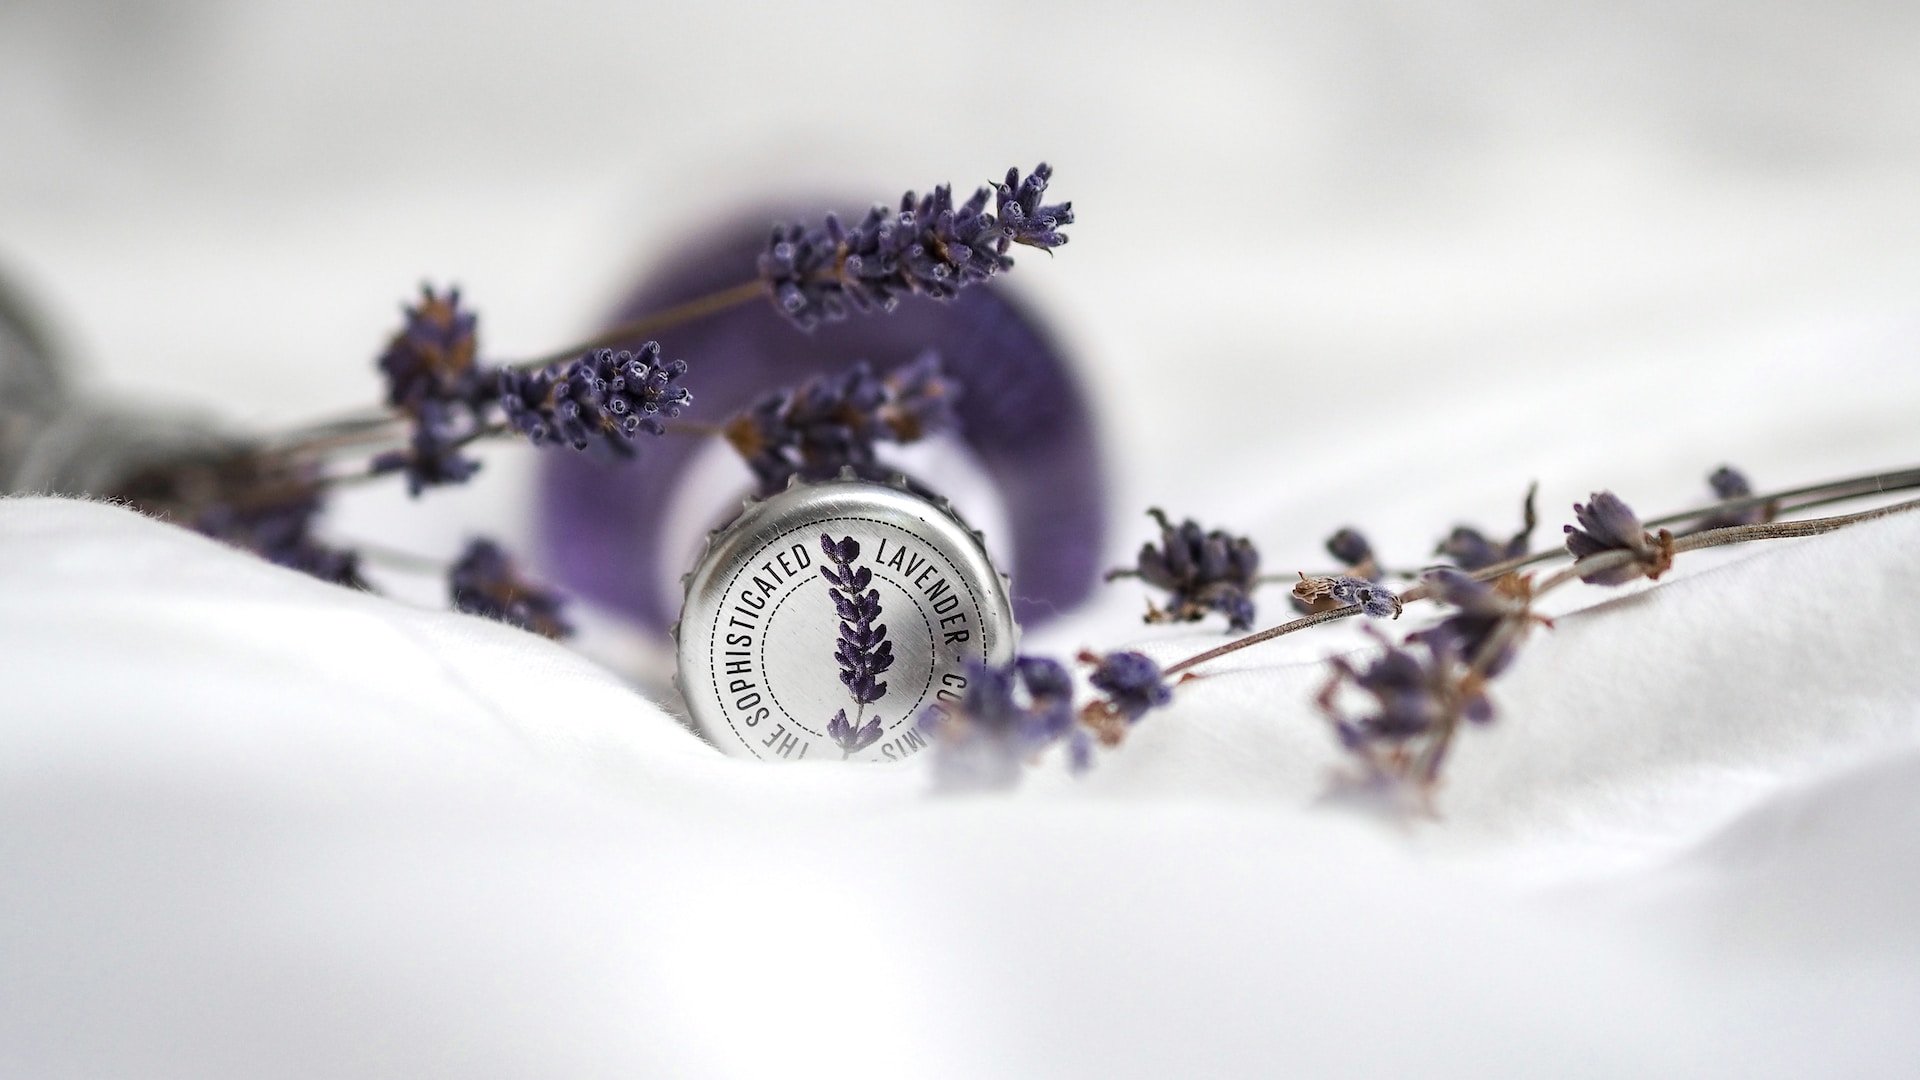 how to use lavender oil for sleep, benefits of lavender oil, sleep better, carrier oil, sandalwood oil